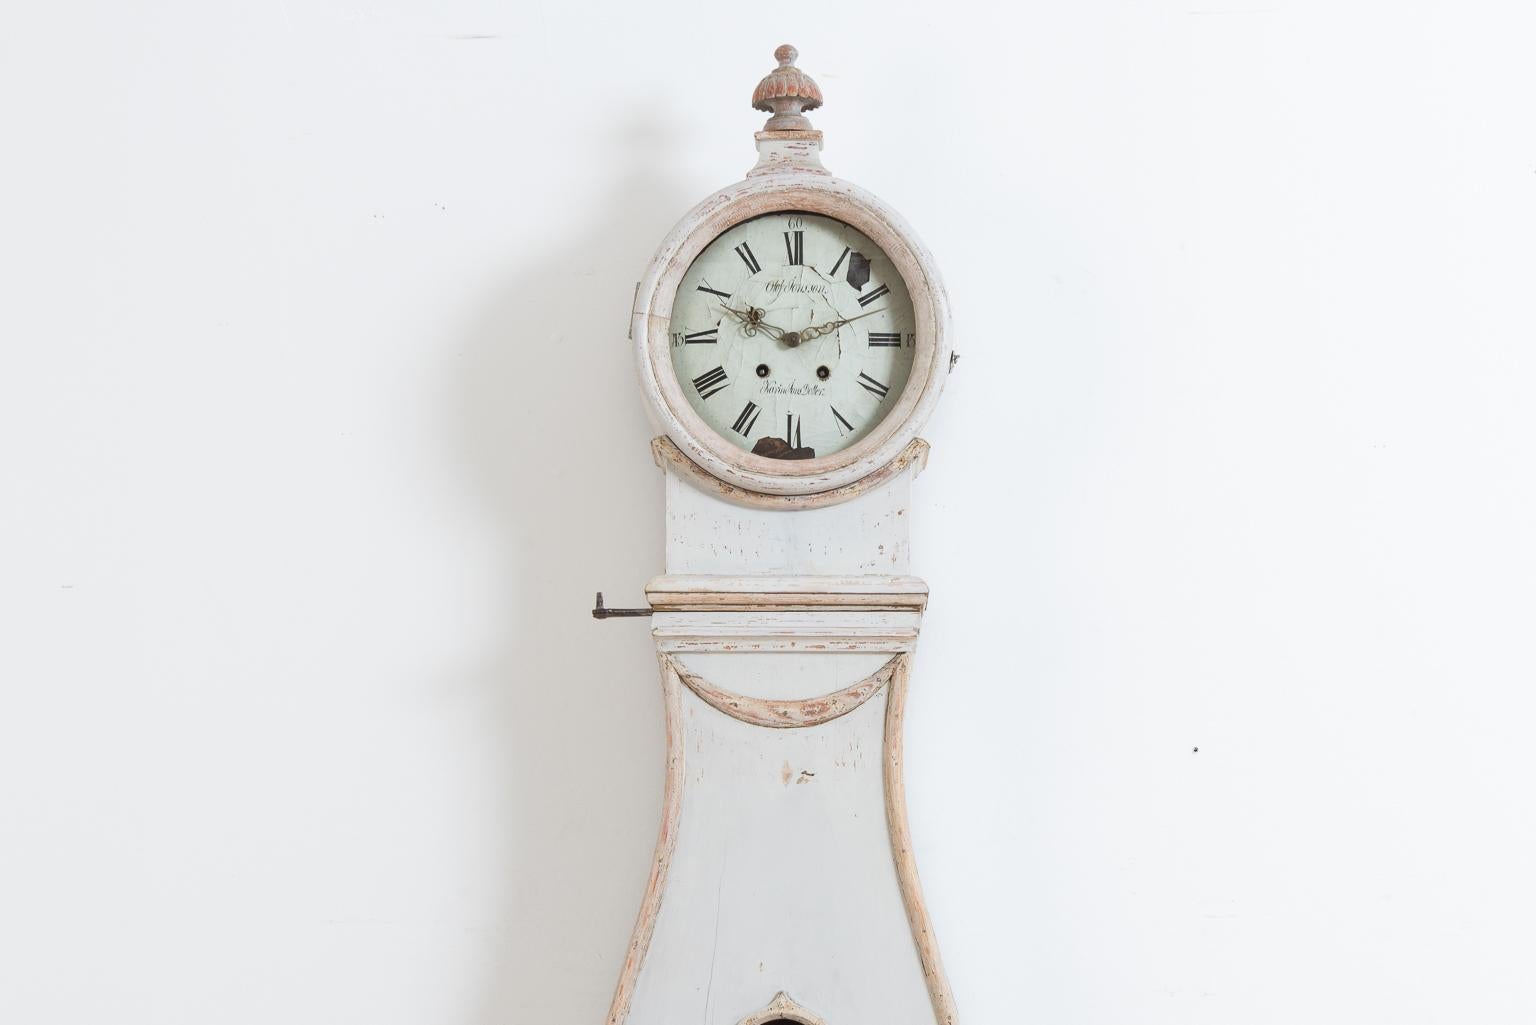 Rococo long case clock from Hälsingland. The paint is old and historic and from the 19th century. The clock has a solid and healthy frame manufactured from Swedish pine. The face has had some minor loss of material. The clock case have some signs of